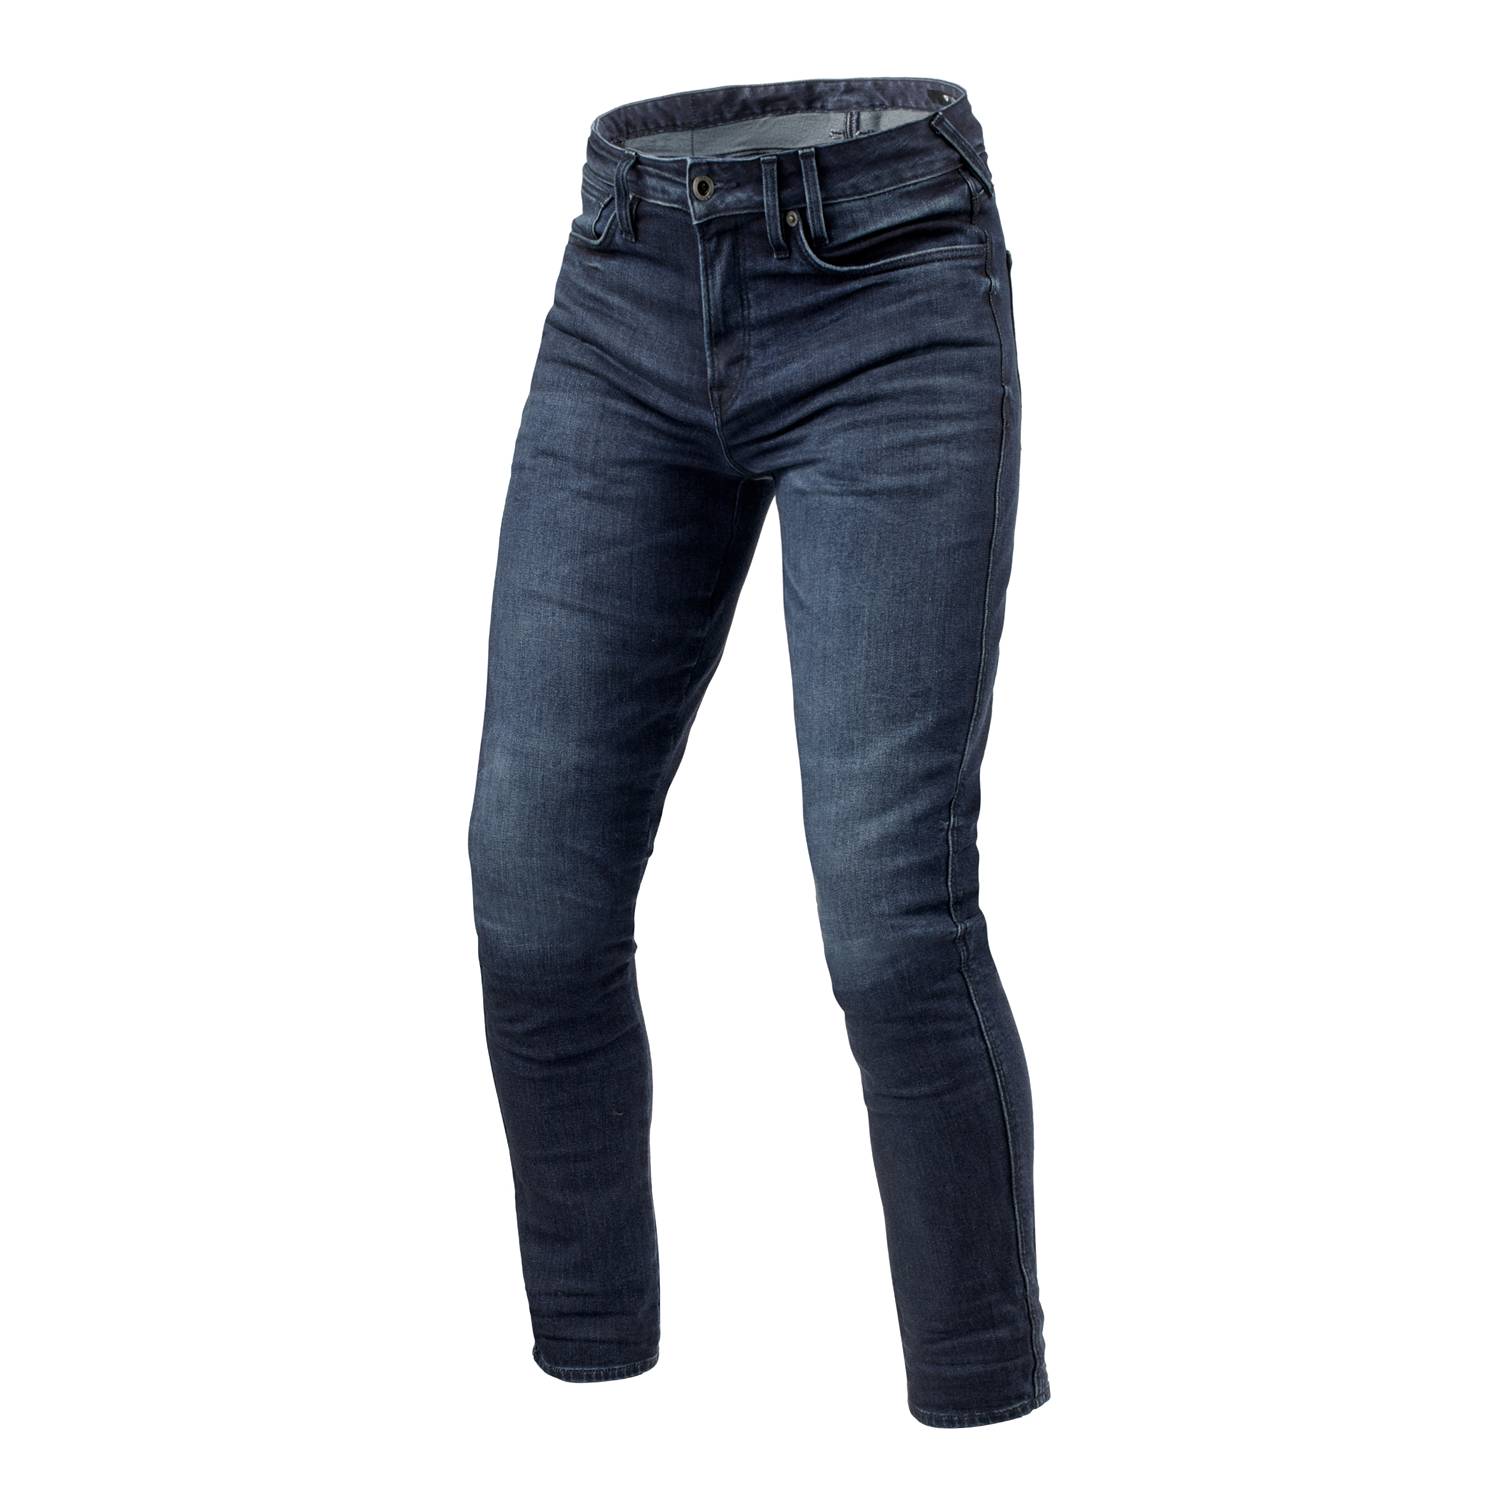 Image of EU REV'IT! Jeans Carlin SK Dark Blue Used L34 Motorcycle Jeans Taille L34/W31